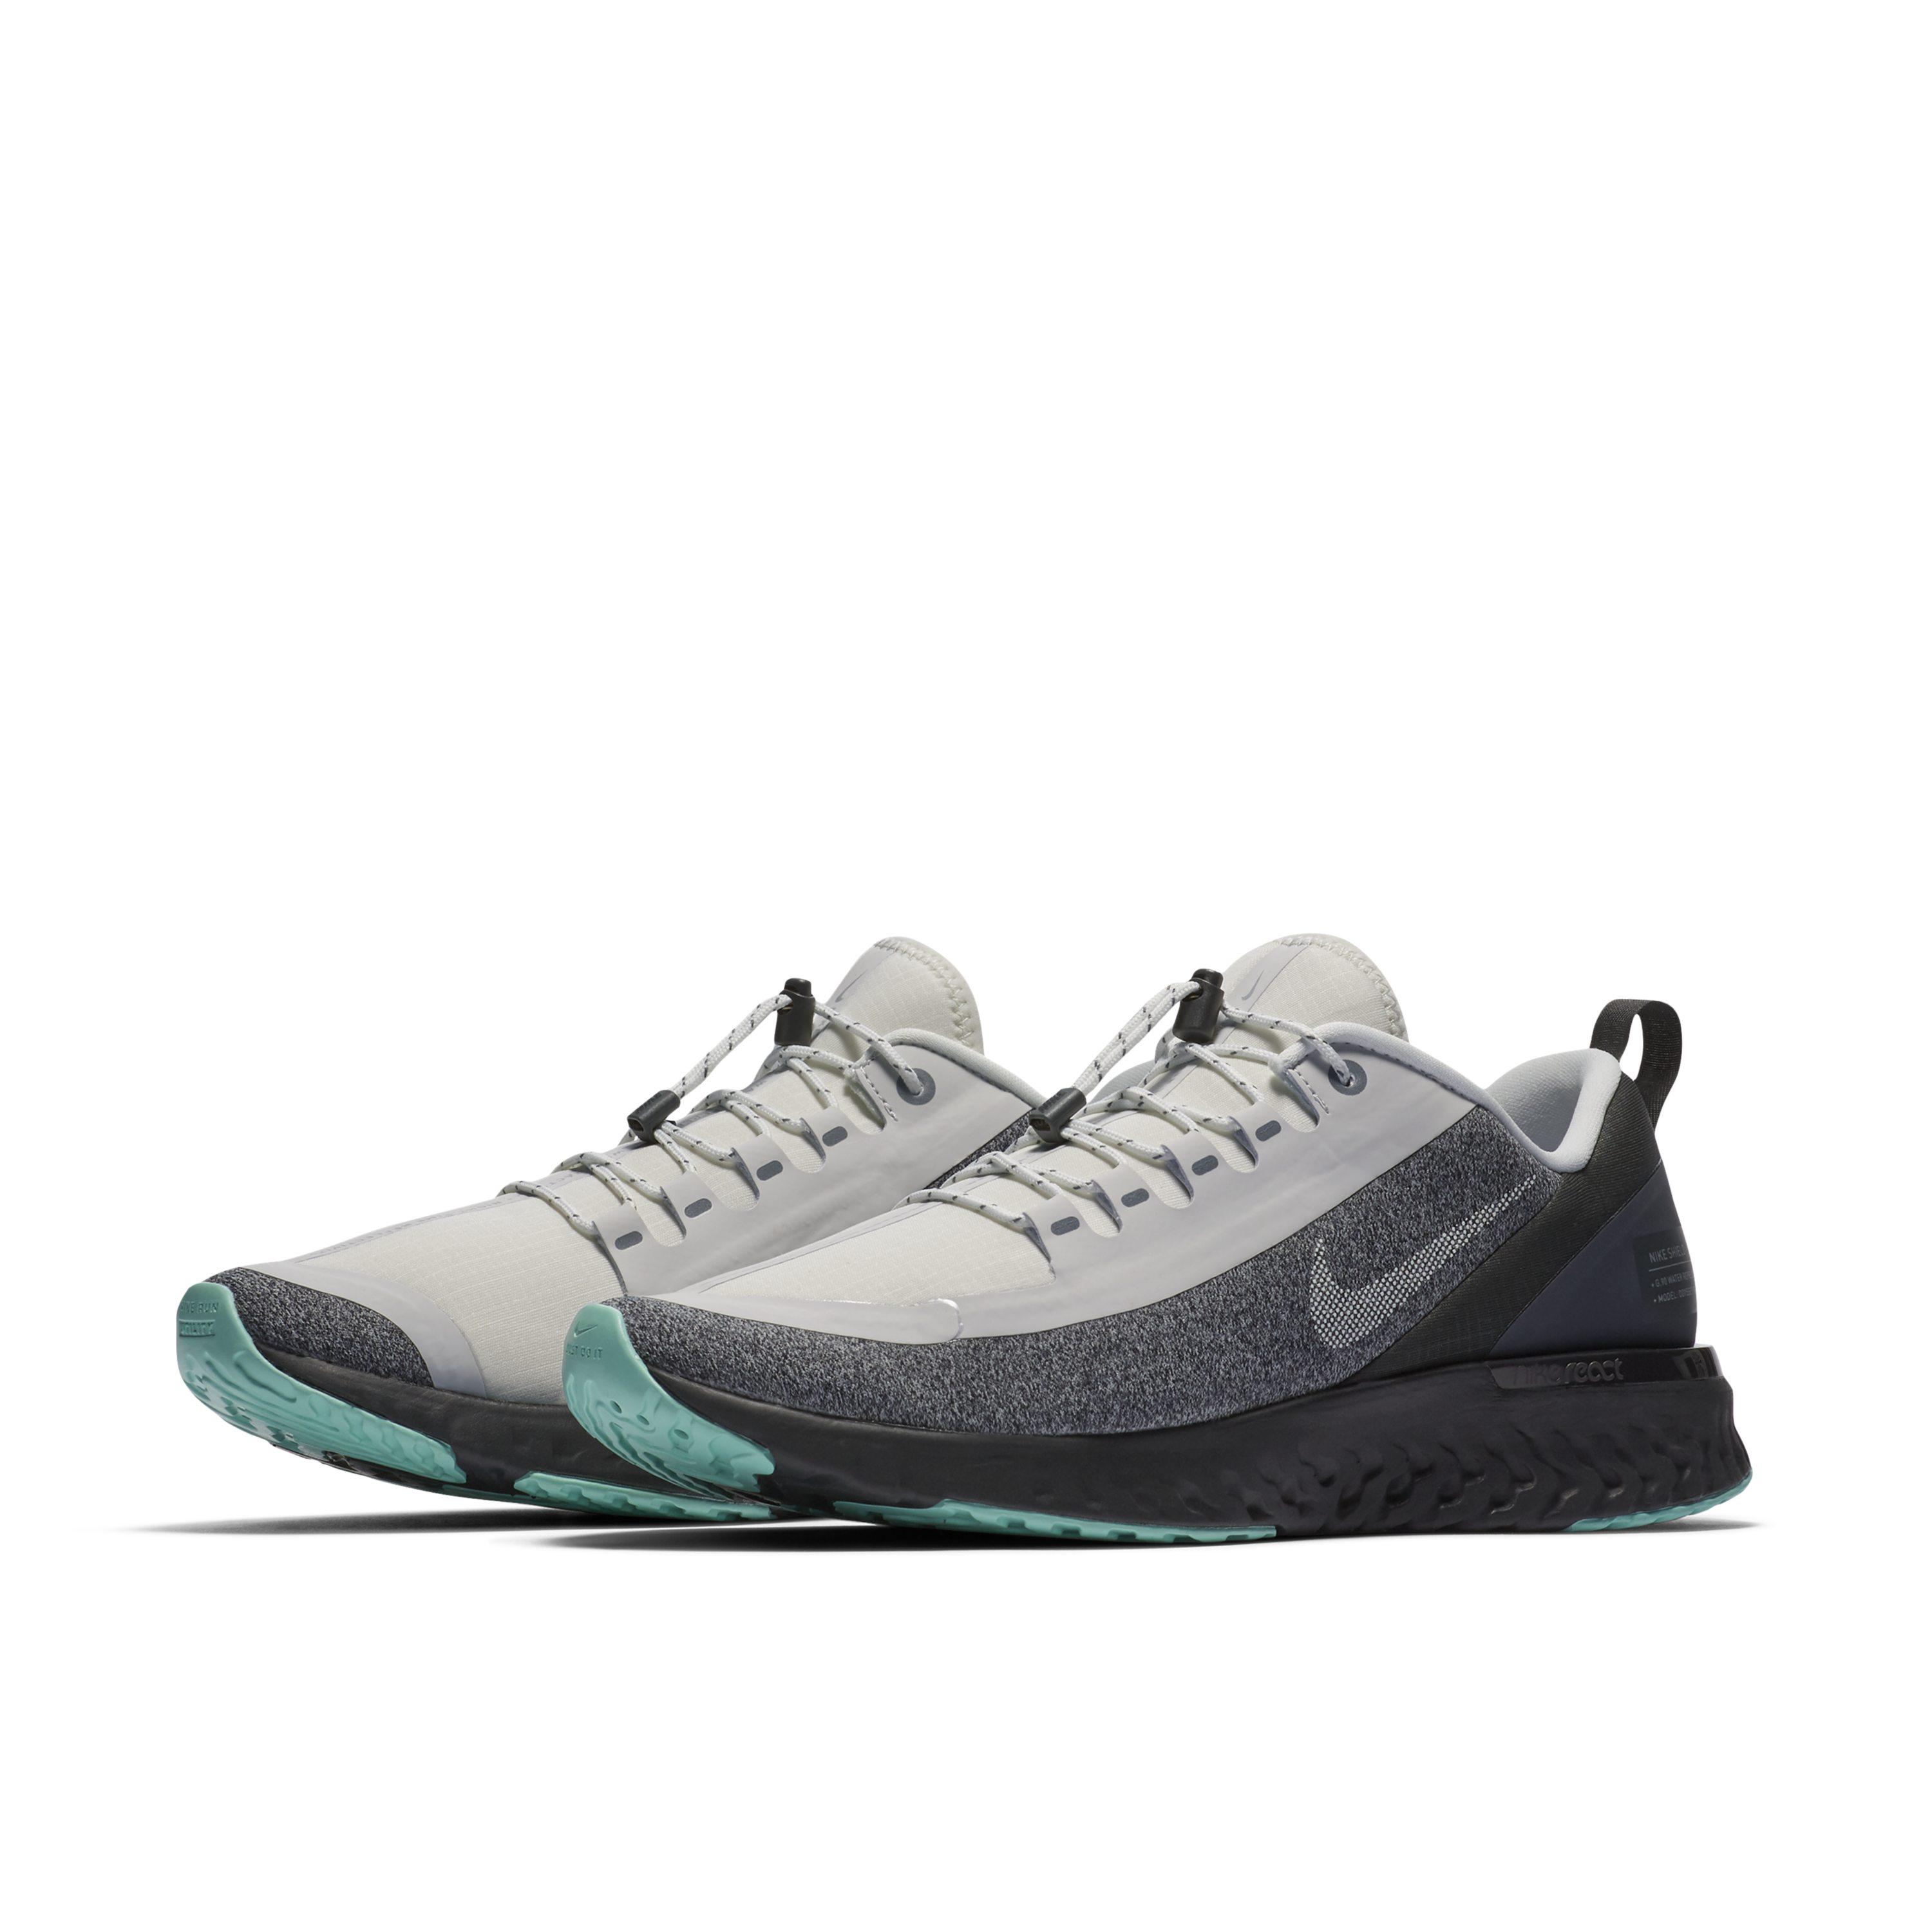 Odyssey React Shield Water-repellent Running Shoe White | Lyst UK